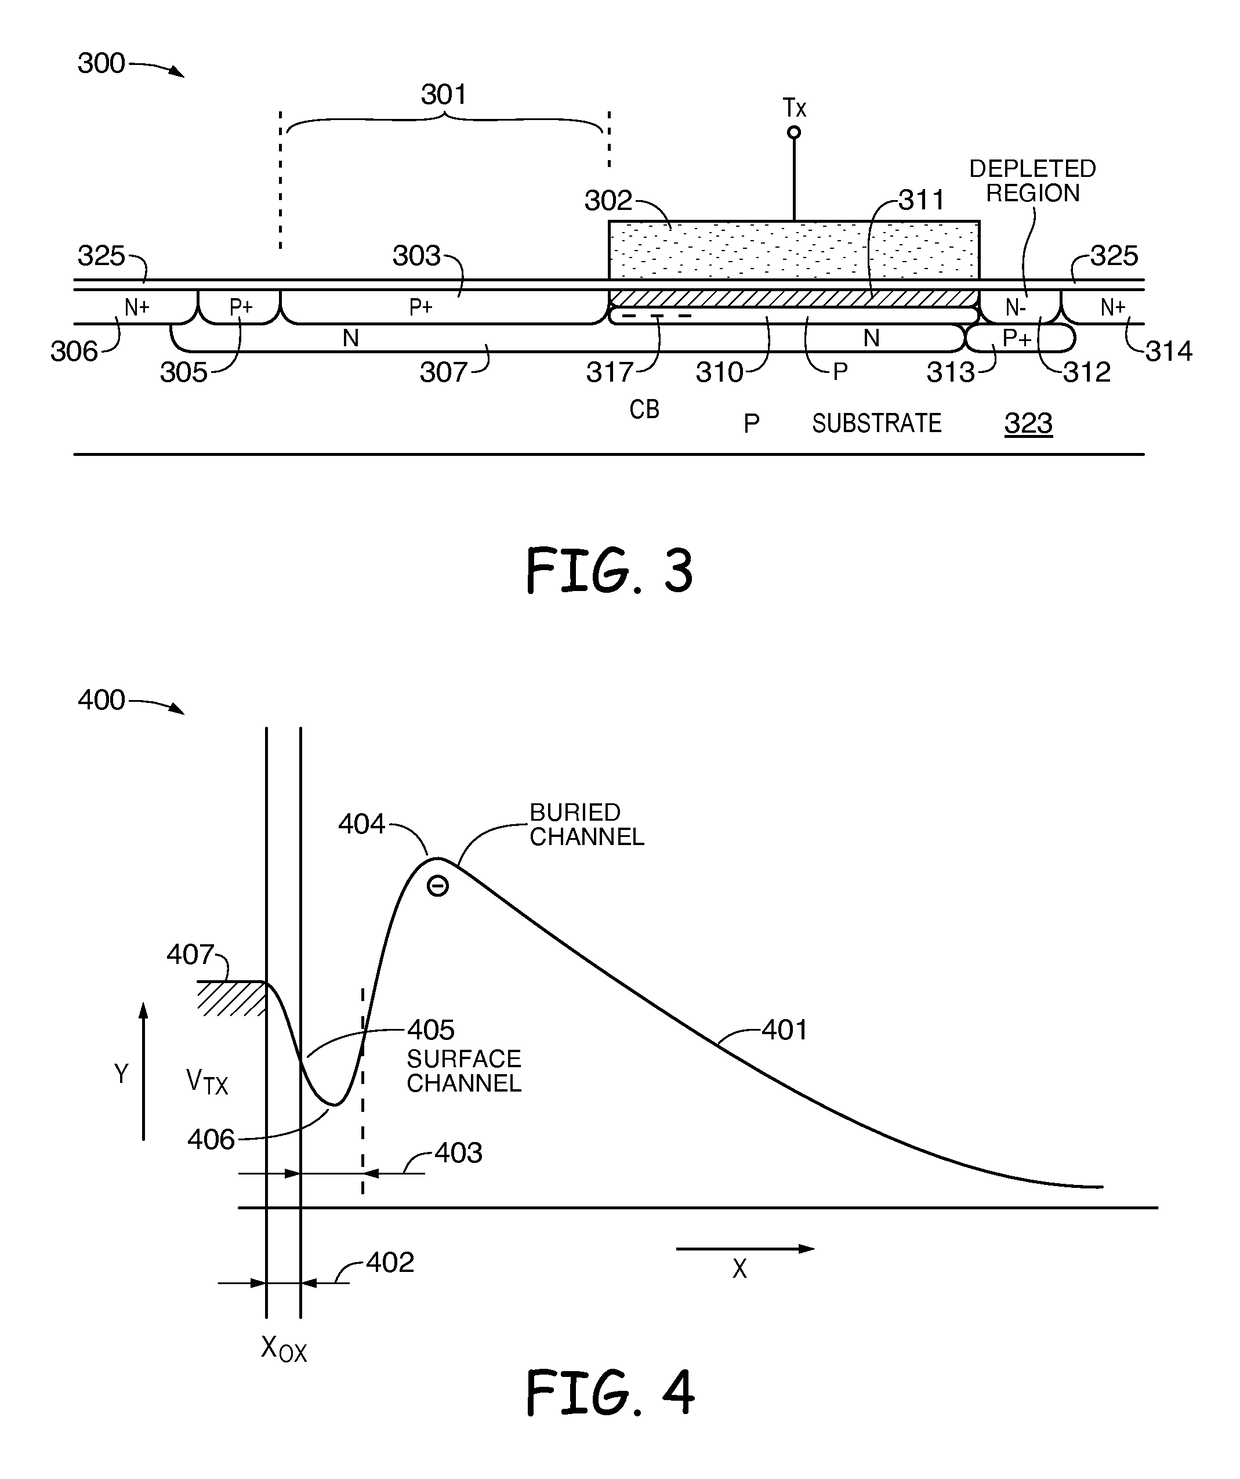 CMOS image sensor having global shutter pixels built using a buried channel transfer gate with a surface channel dark current drain